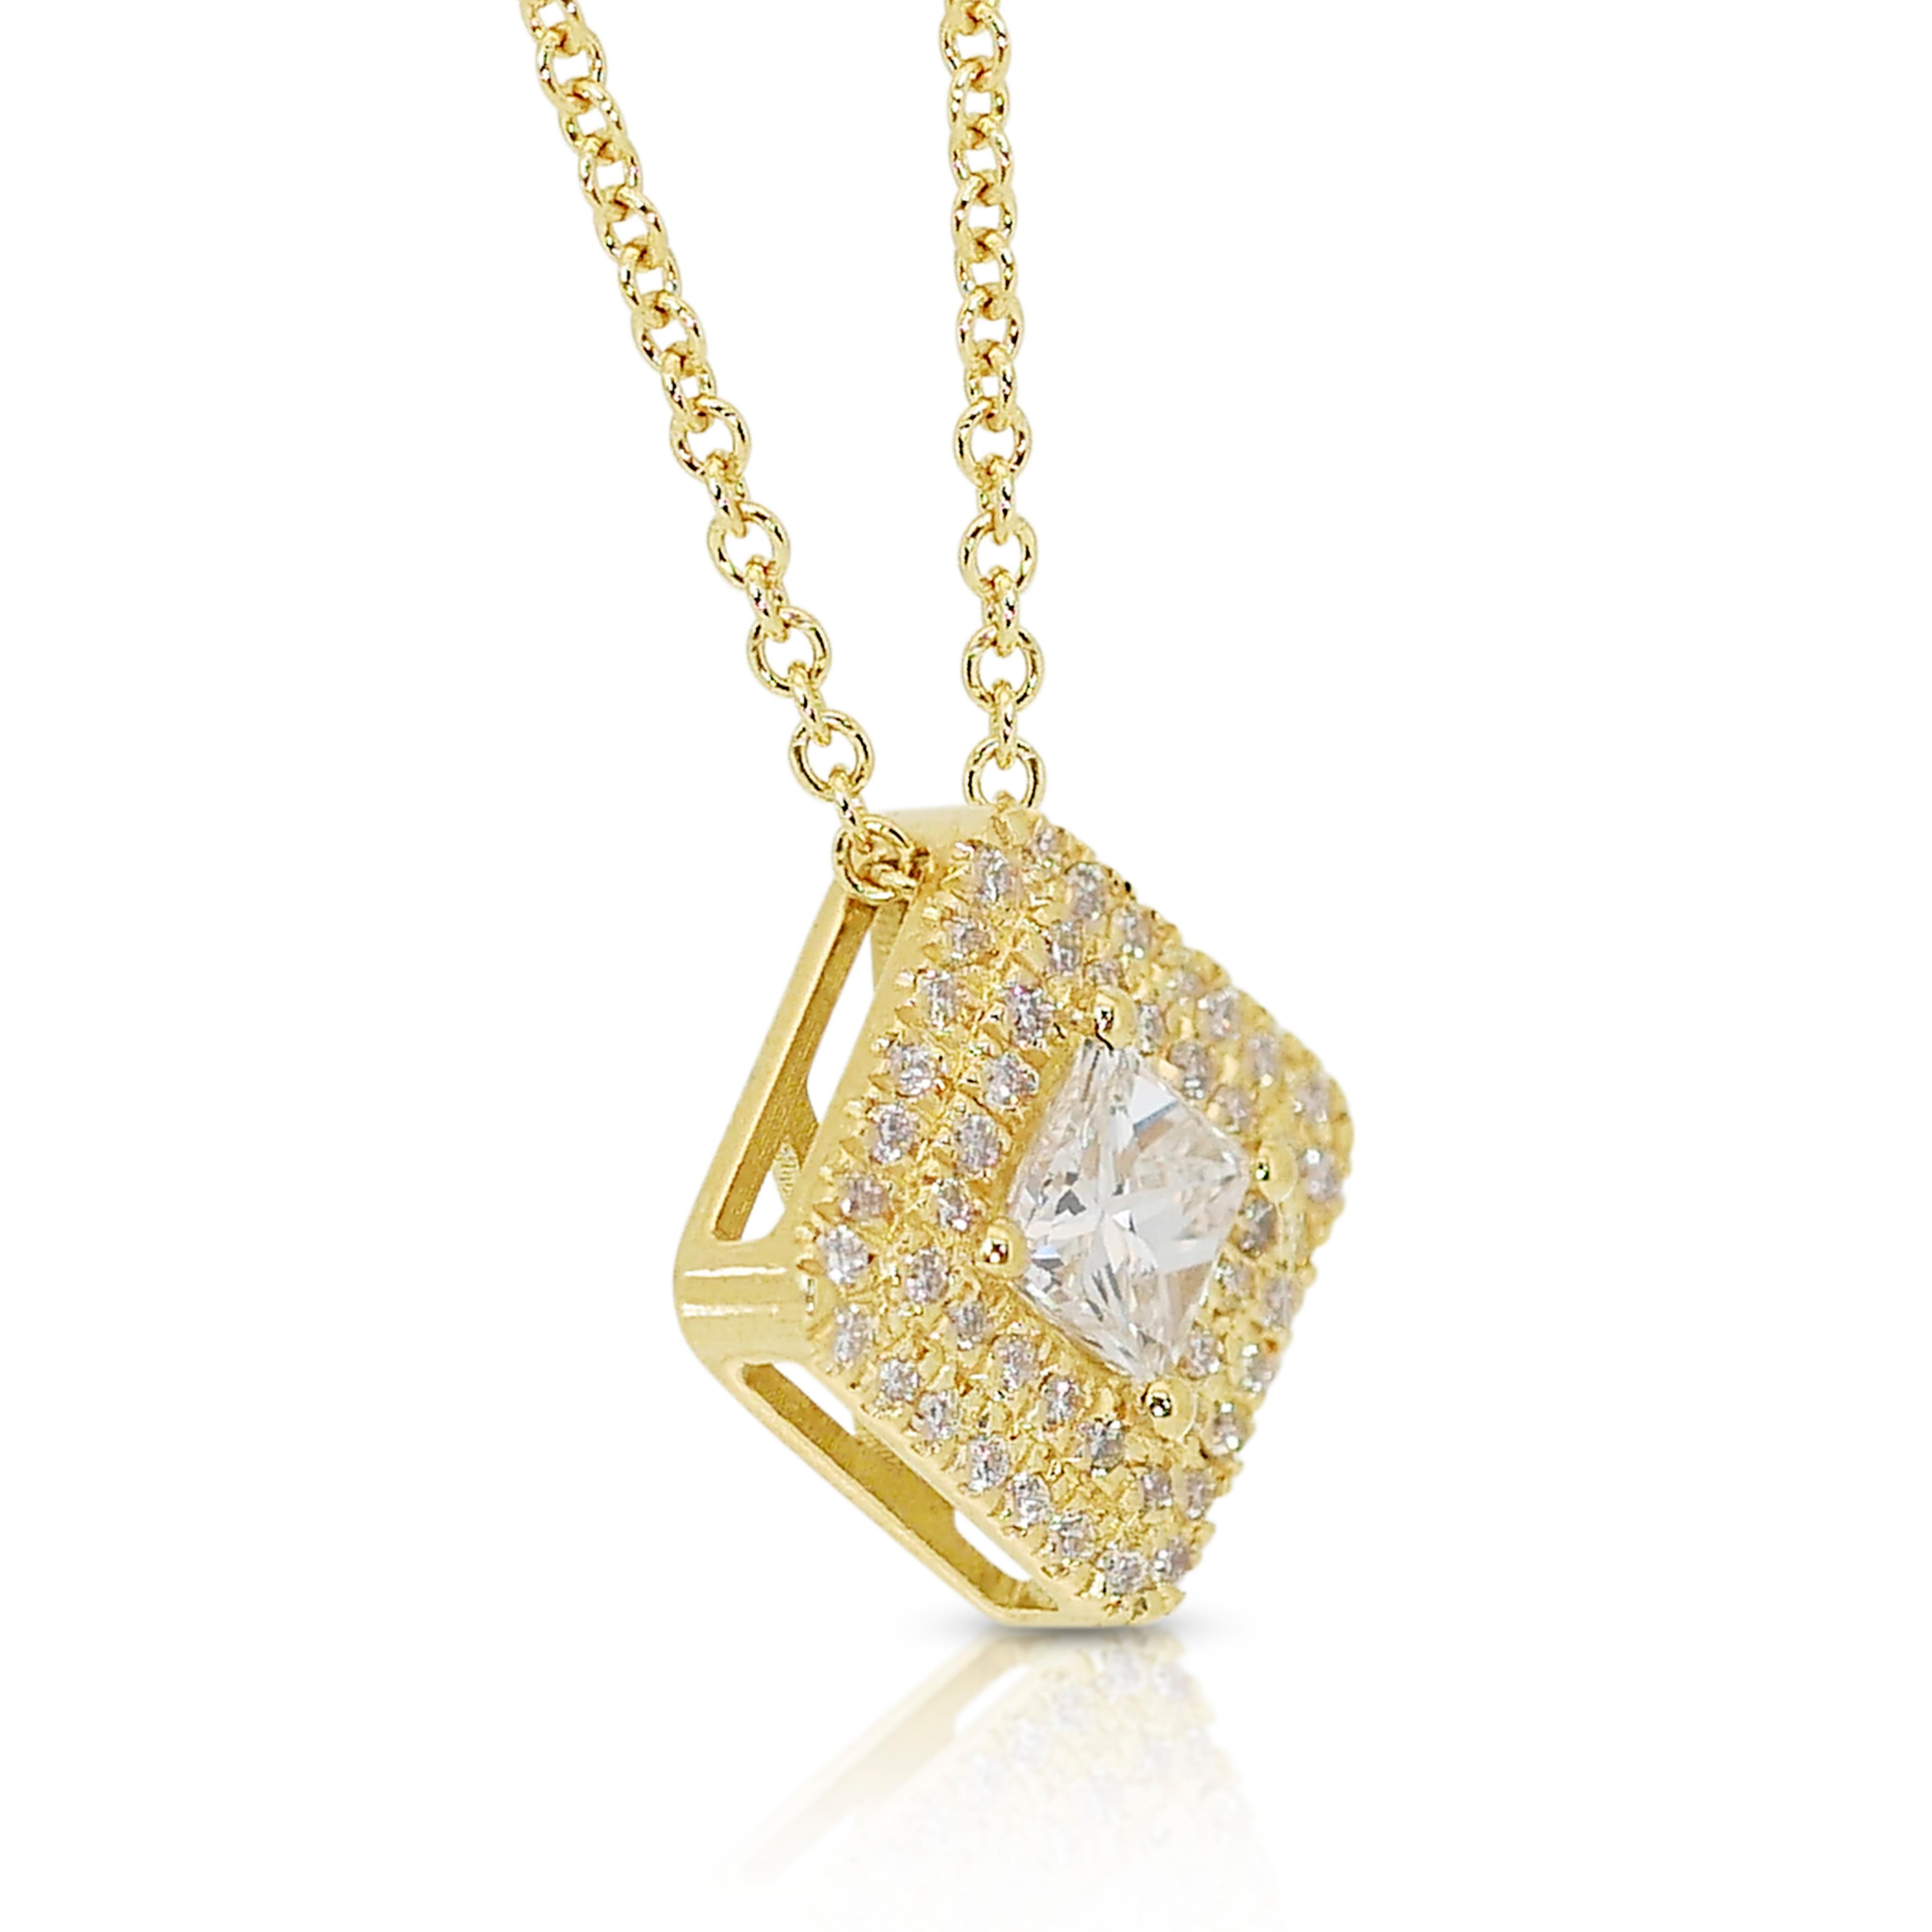 Sophisticated 0.60ct Diamonds Double Halo Necklace in 18k Yellow Gold - IGI Cert For Sale 1